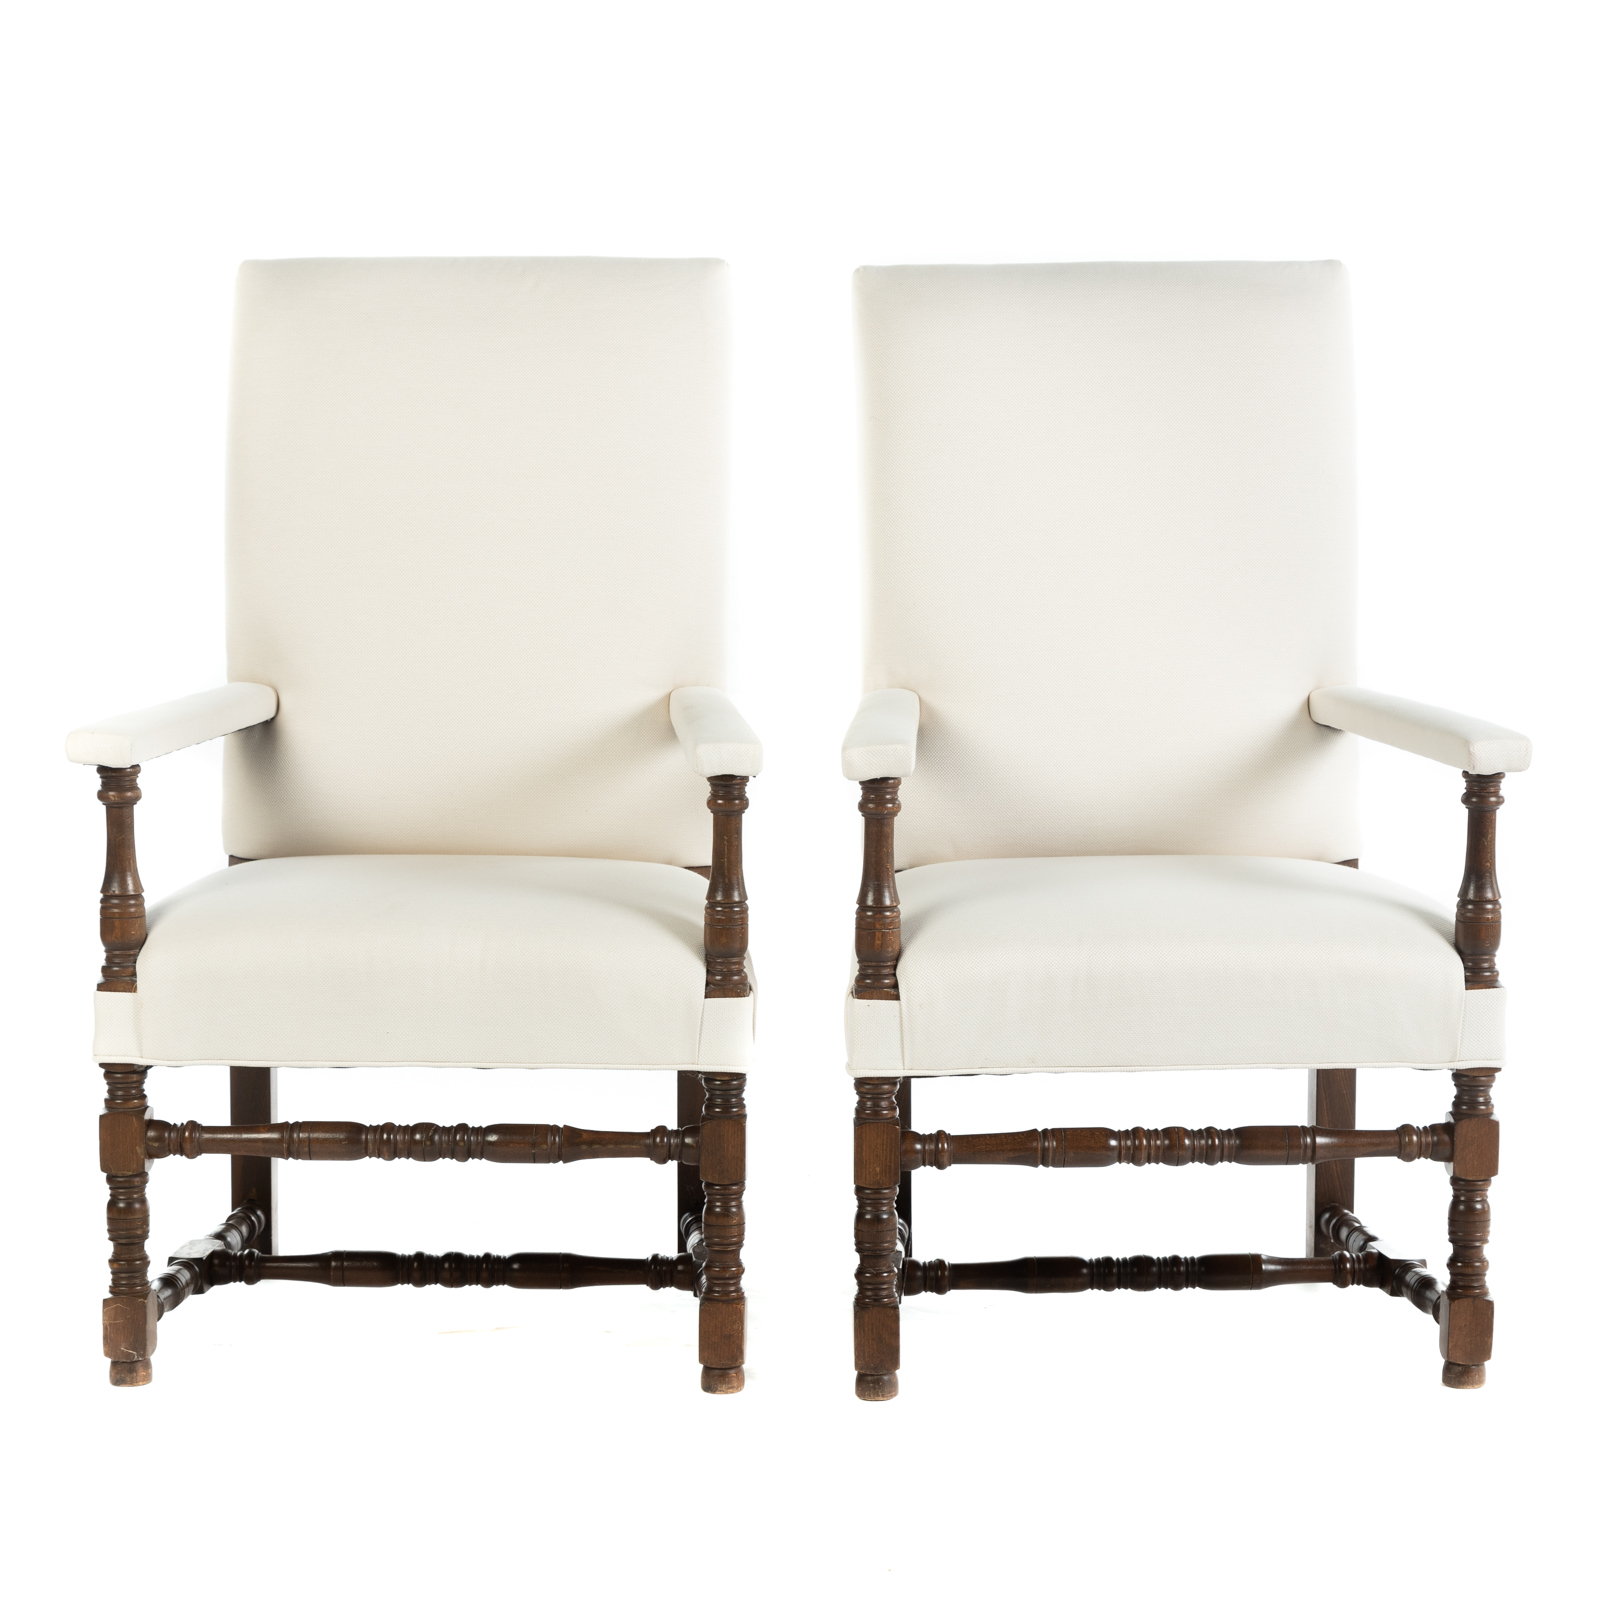 A PAIR OF JACOBEAN STYLE UPHOLSTERED